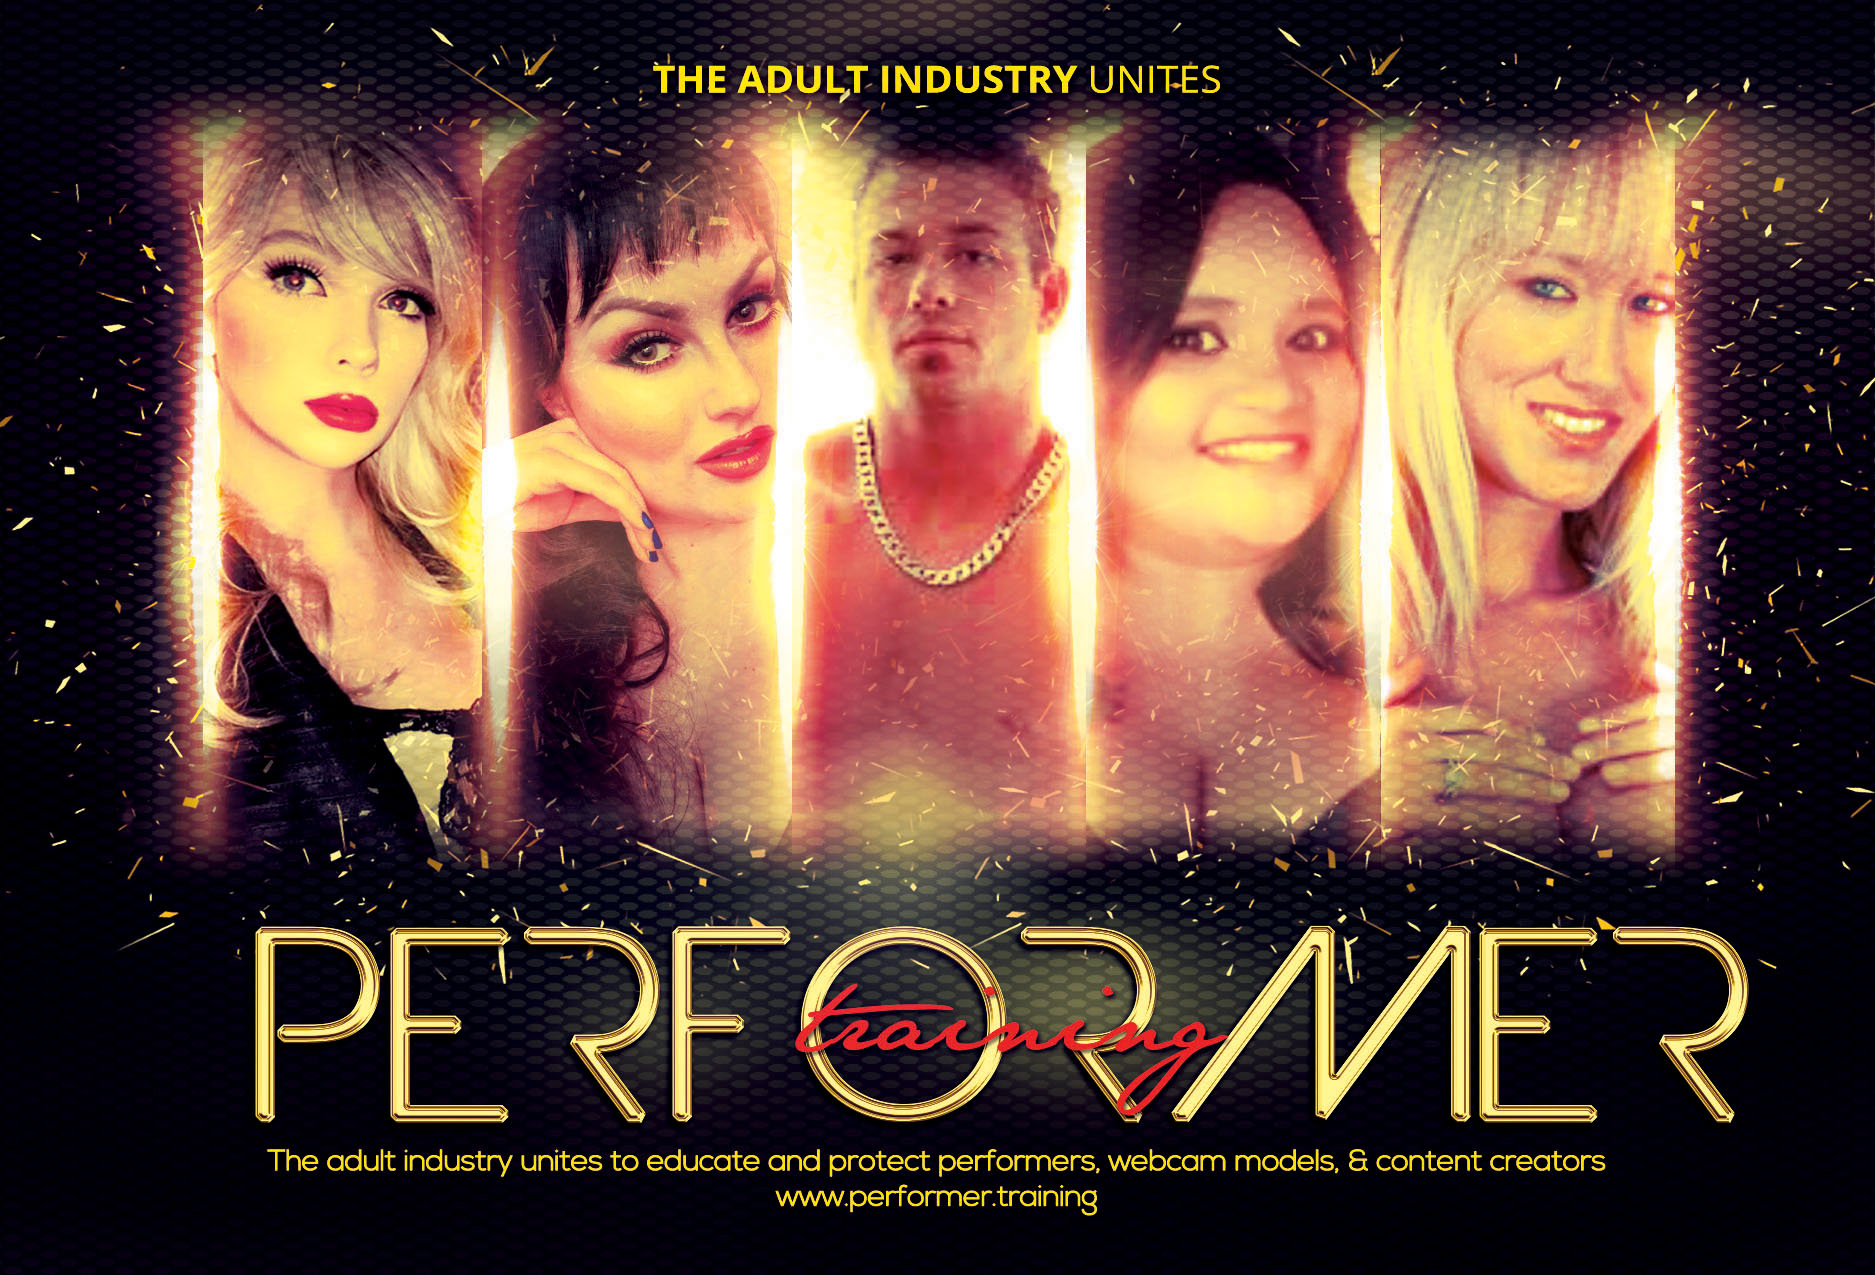 Performer.Training – Get Adult Industry Certified